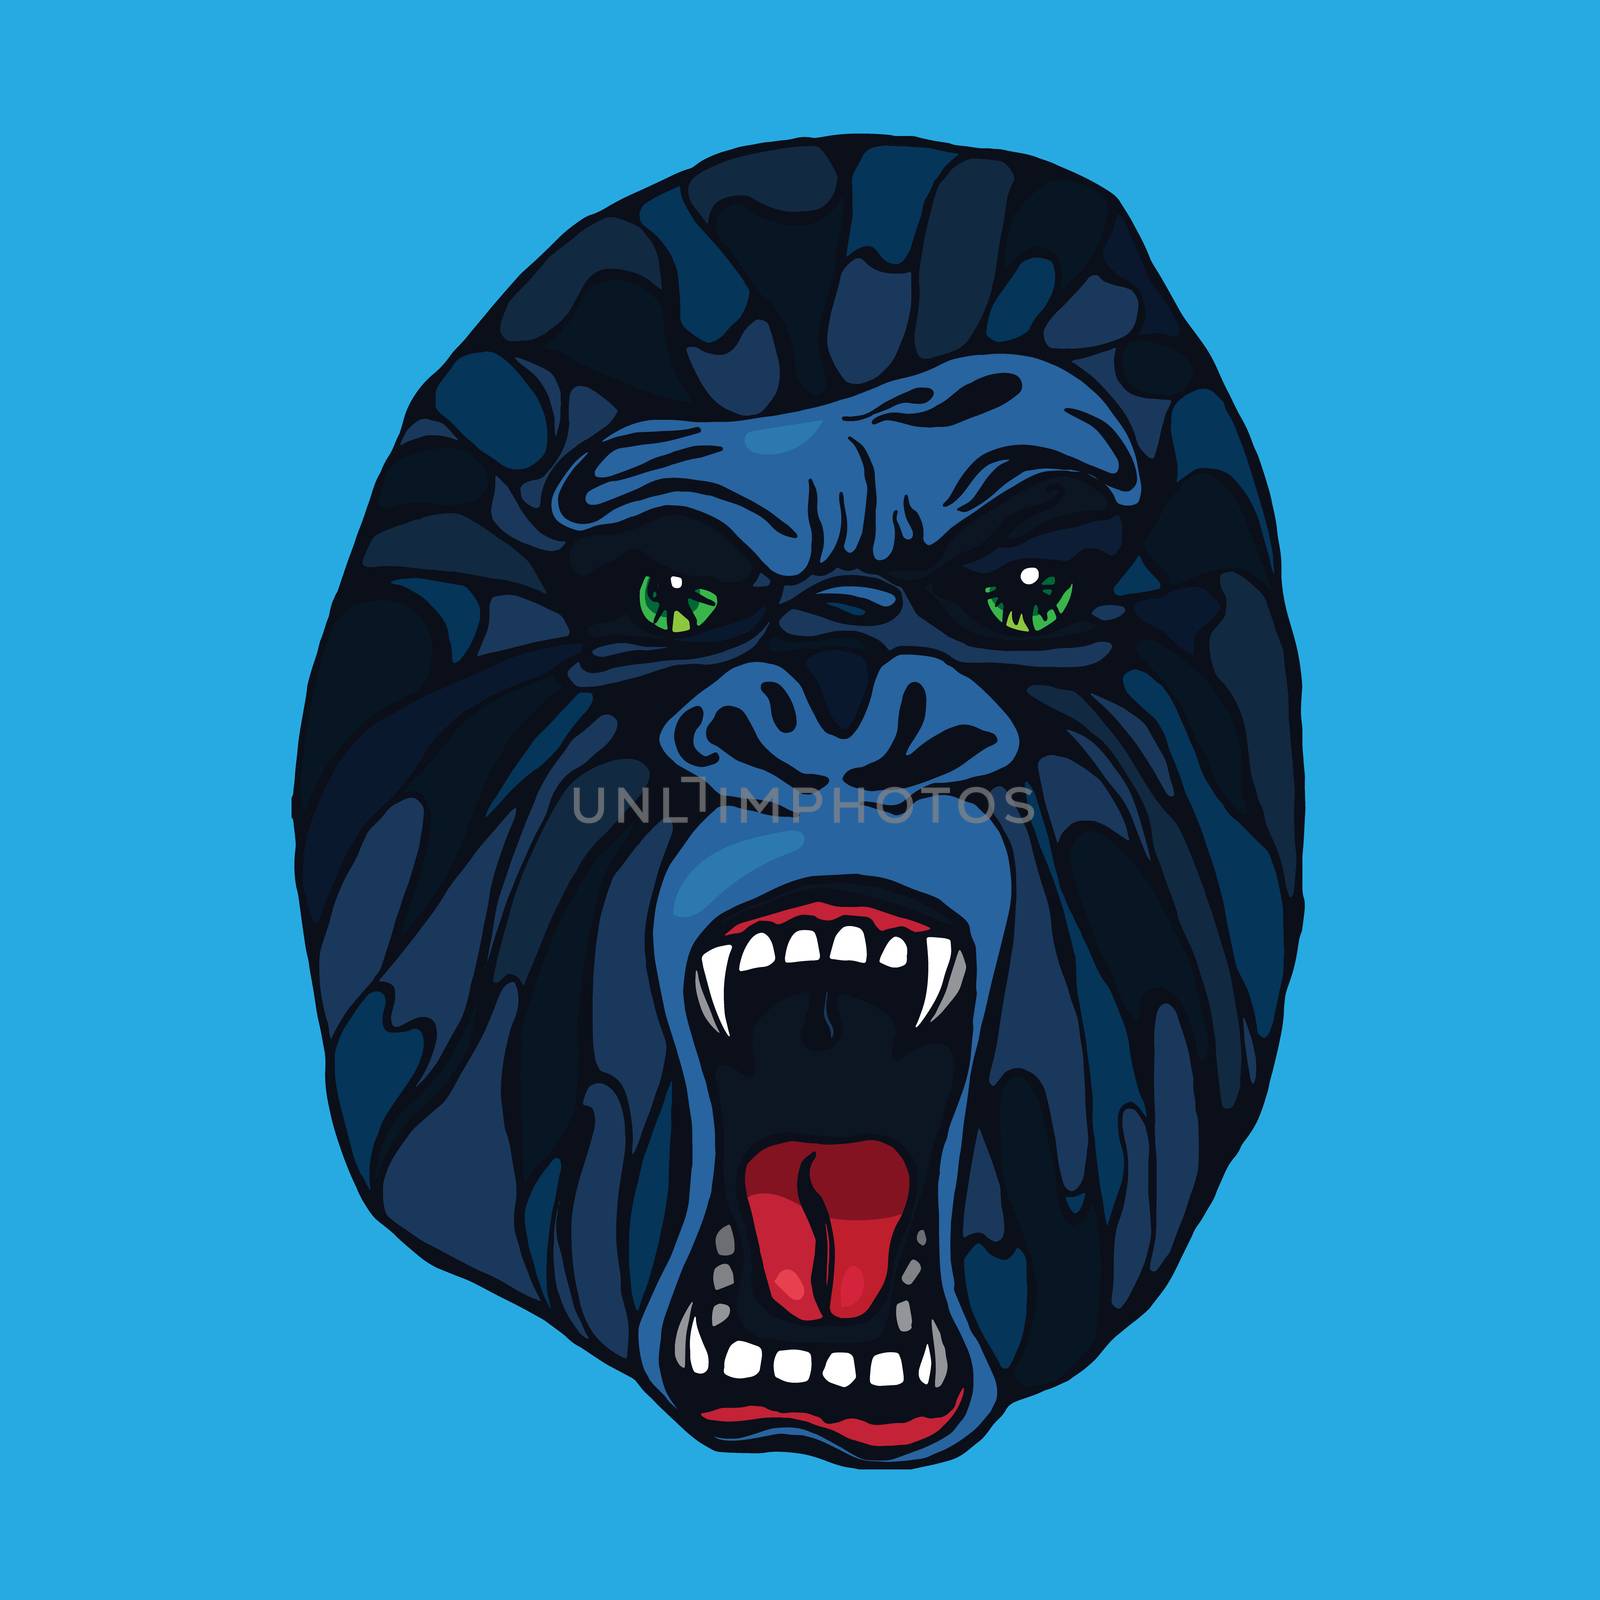 Growling detailed gorilla in cartoon style. Design for t-shirt, poster, bag. Vector